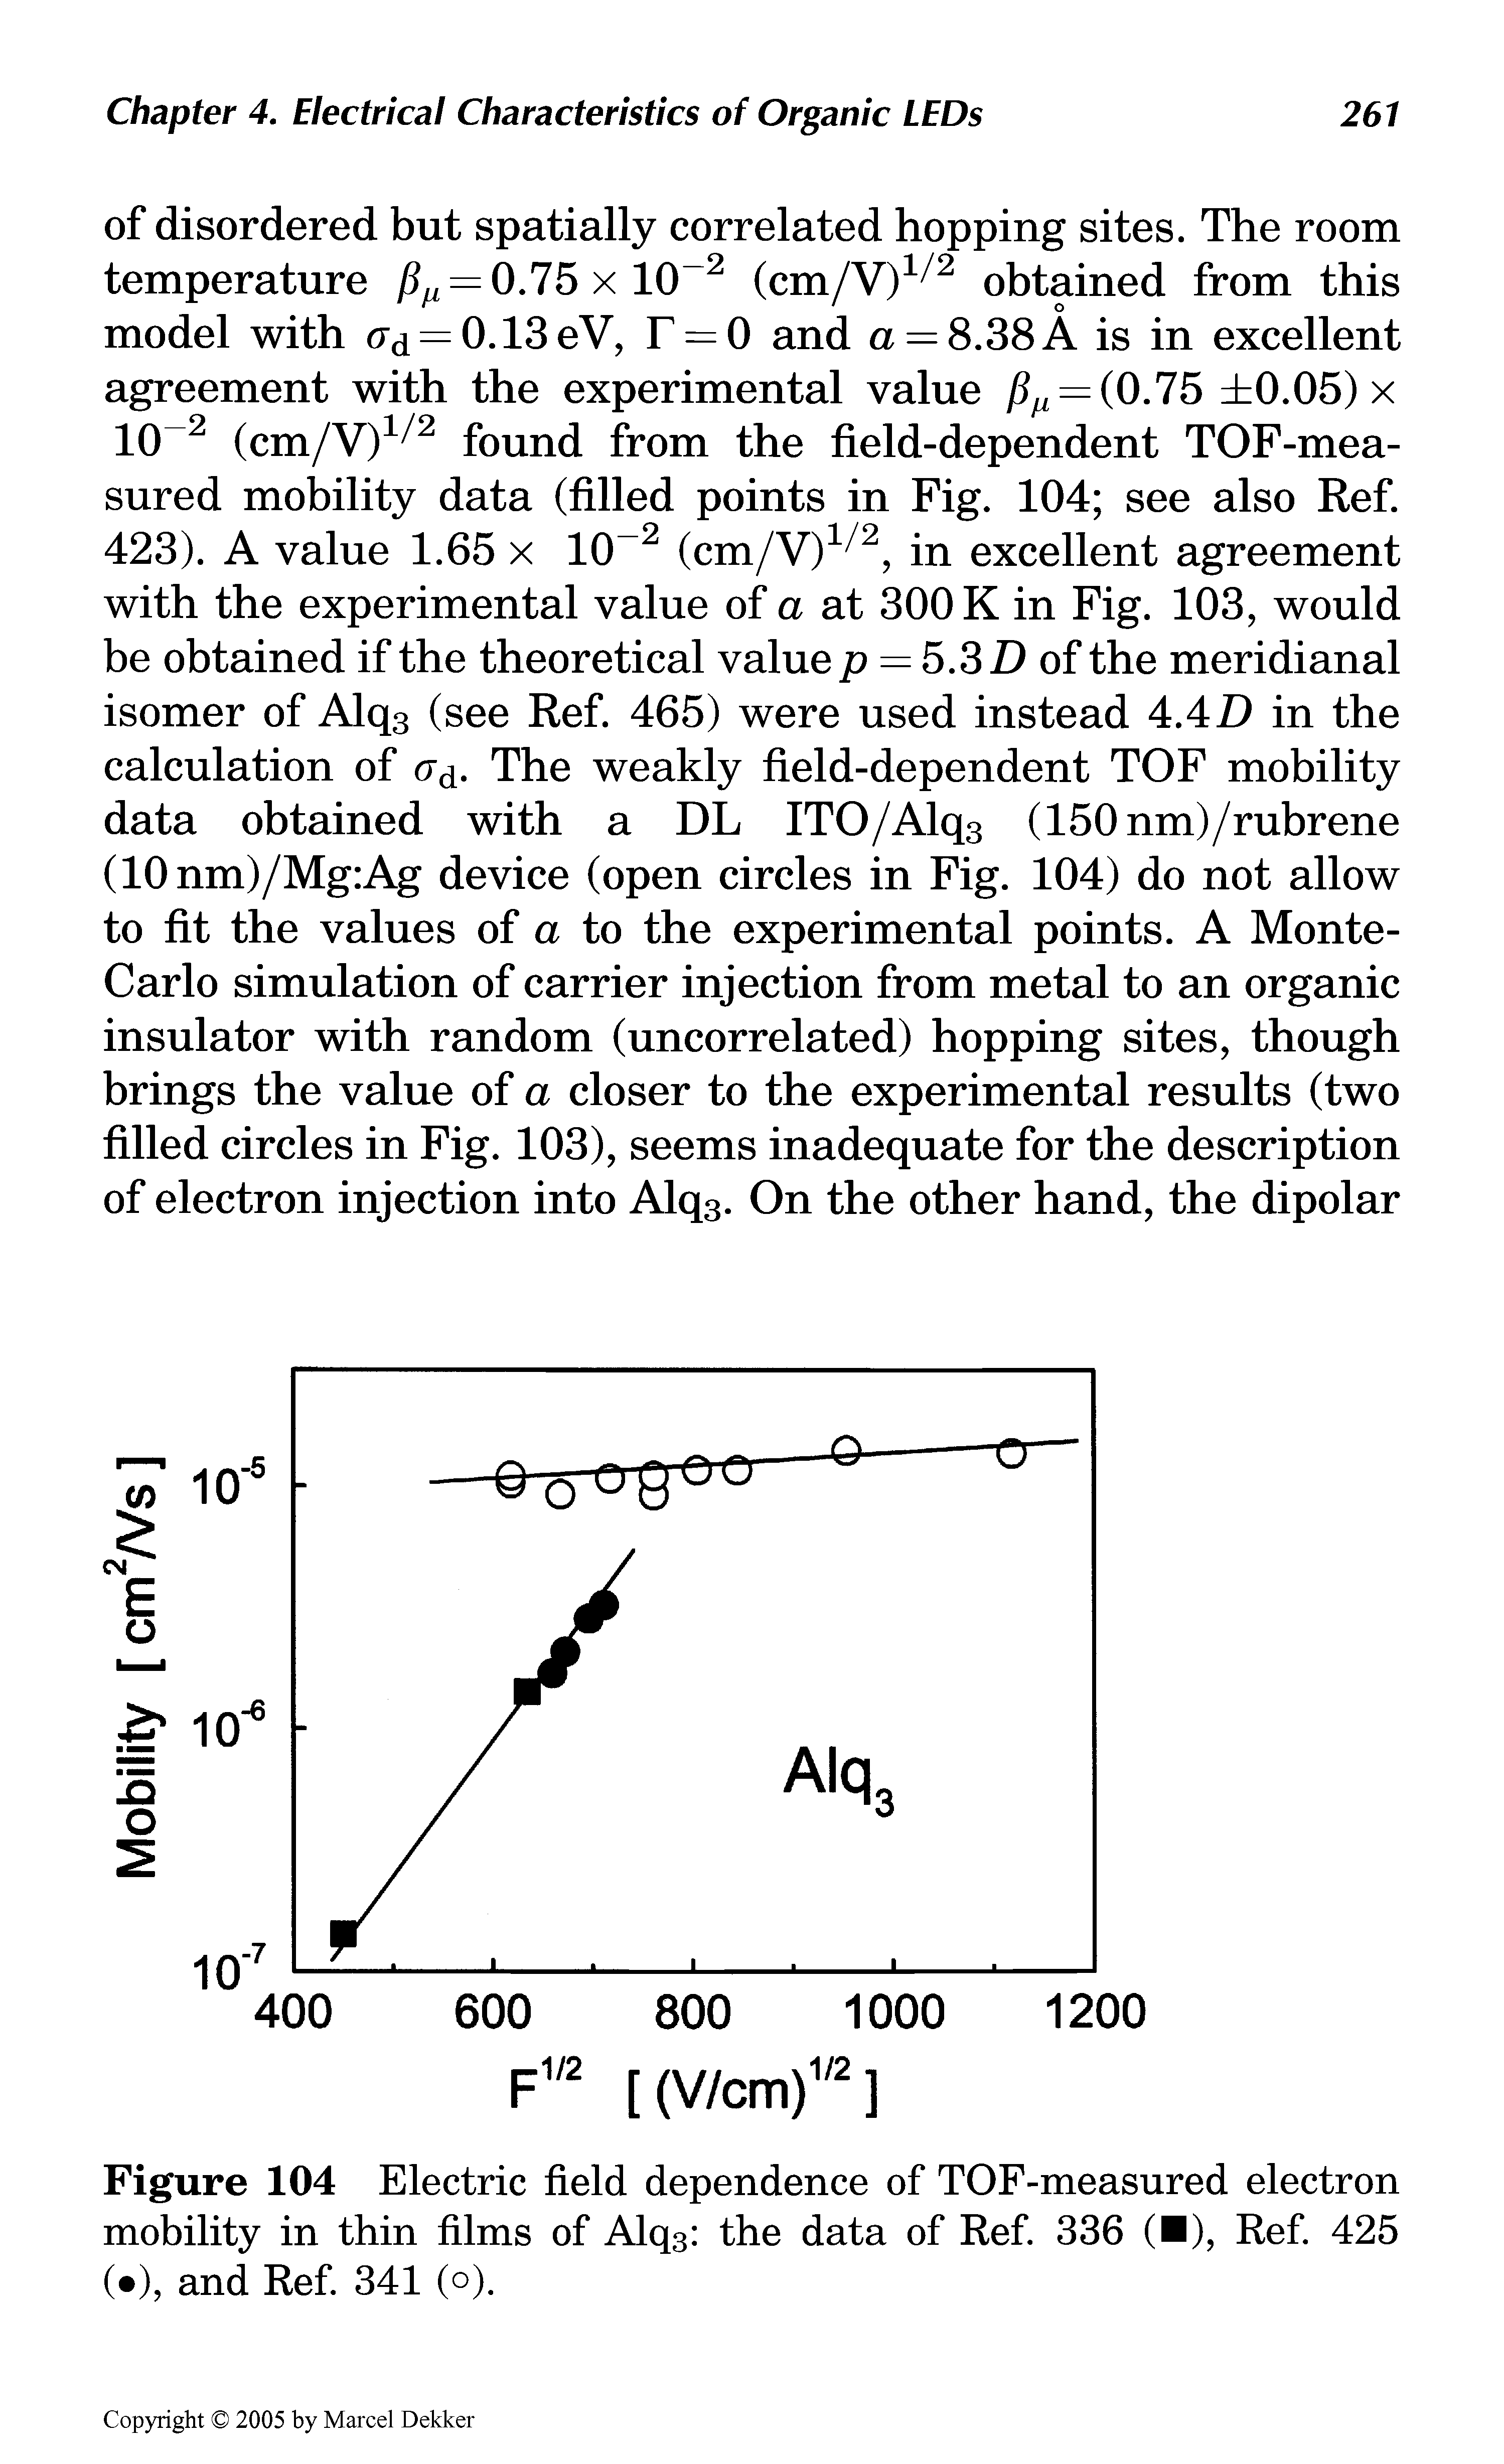 Figure 104 Electric field dependence of TOF-measured electron mobility in thin films of Alq3 the data of Ref. 336 ( ), Ref. 425 ( ), and Ref. 341 (o).